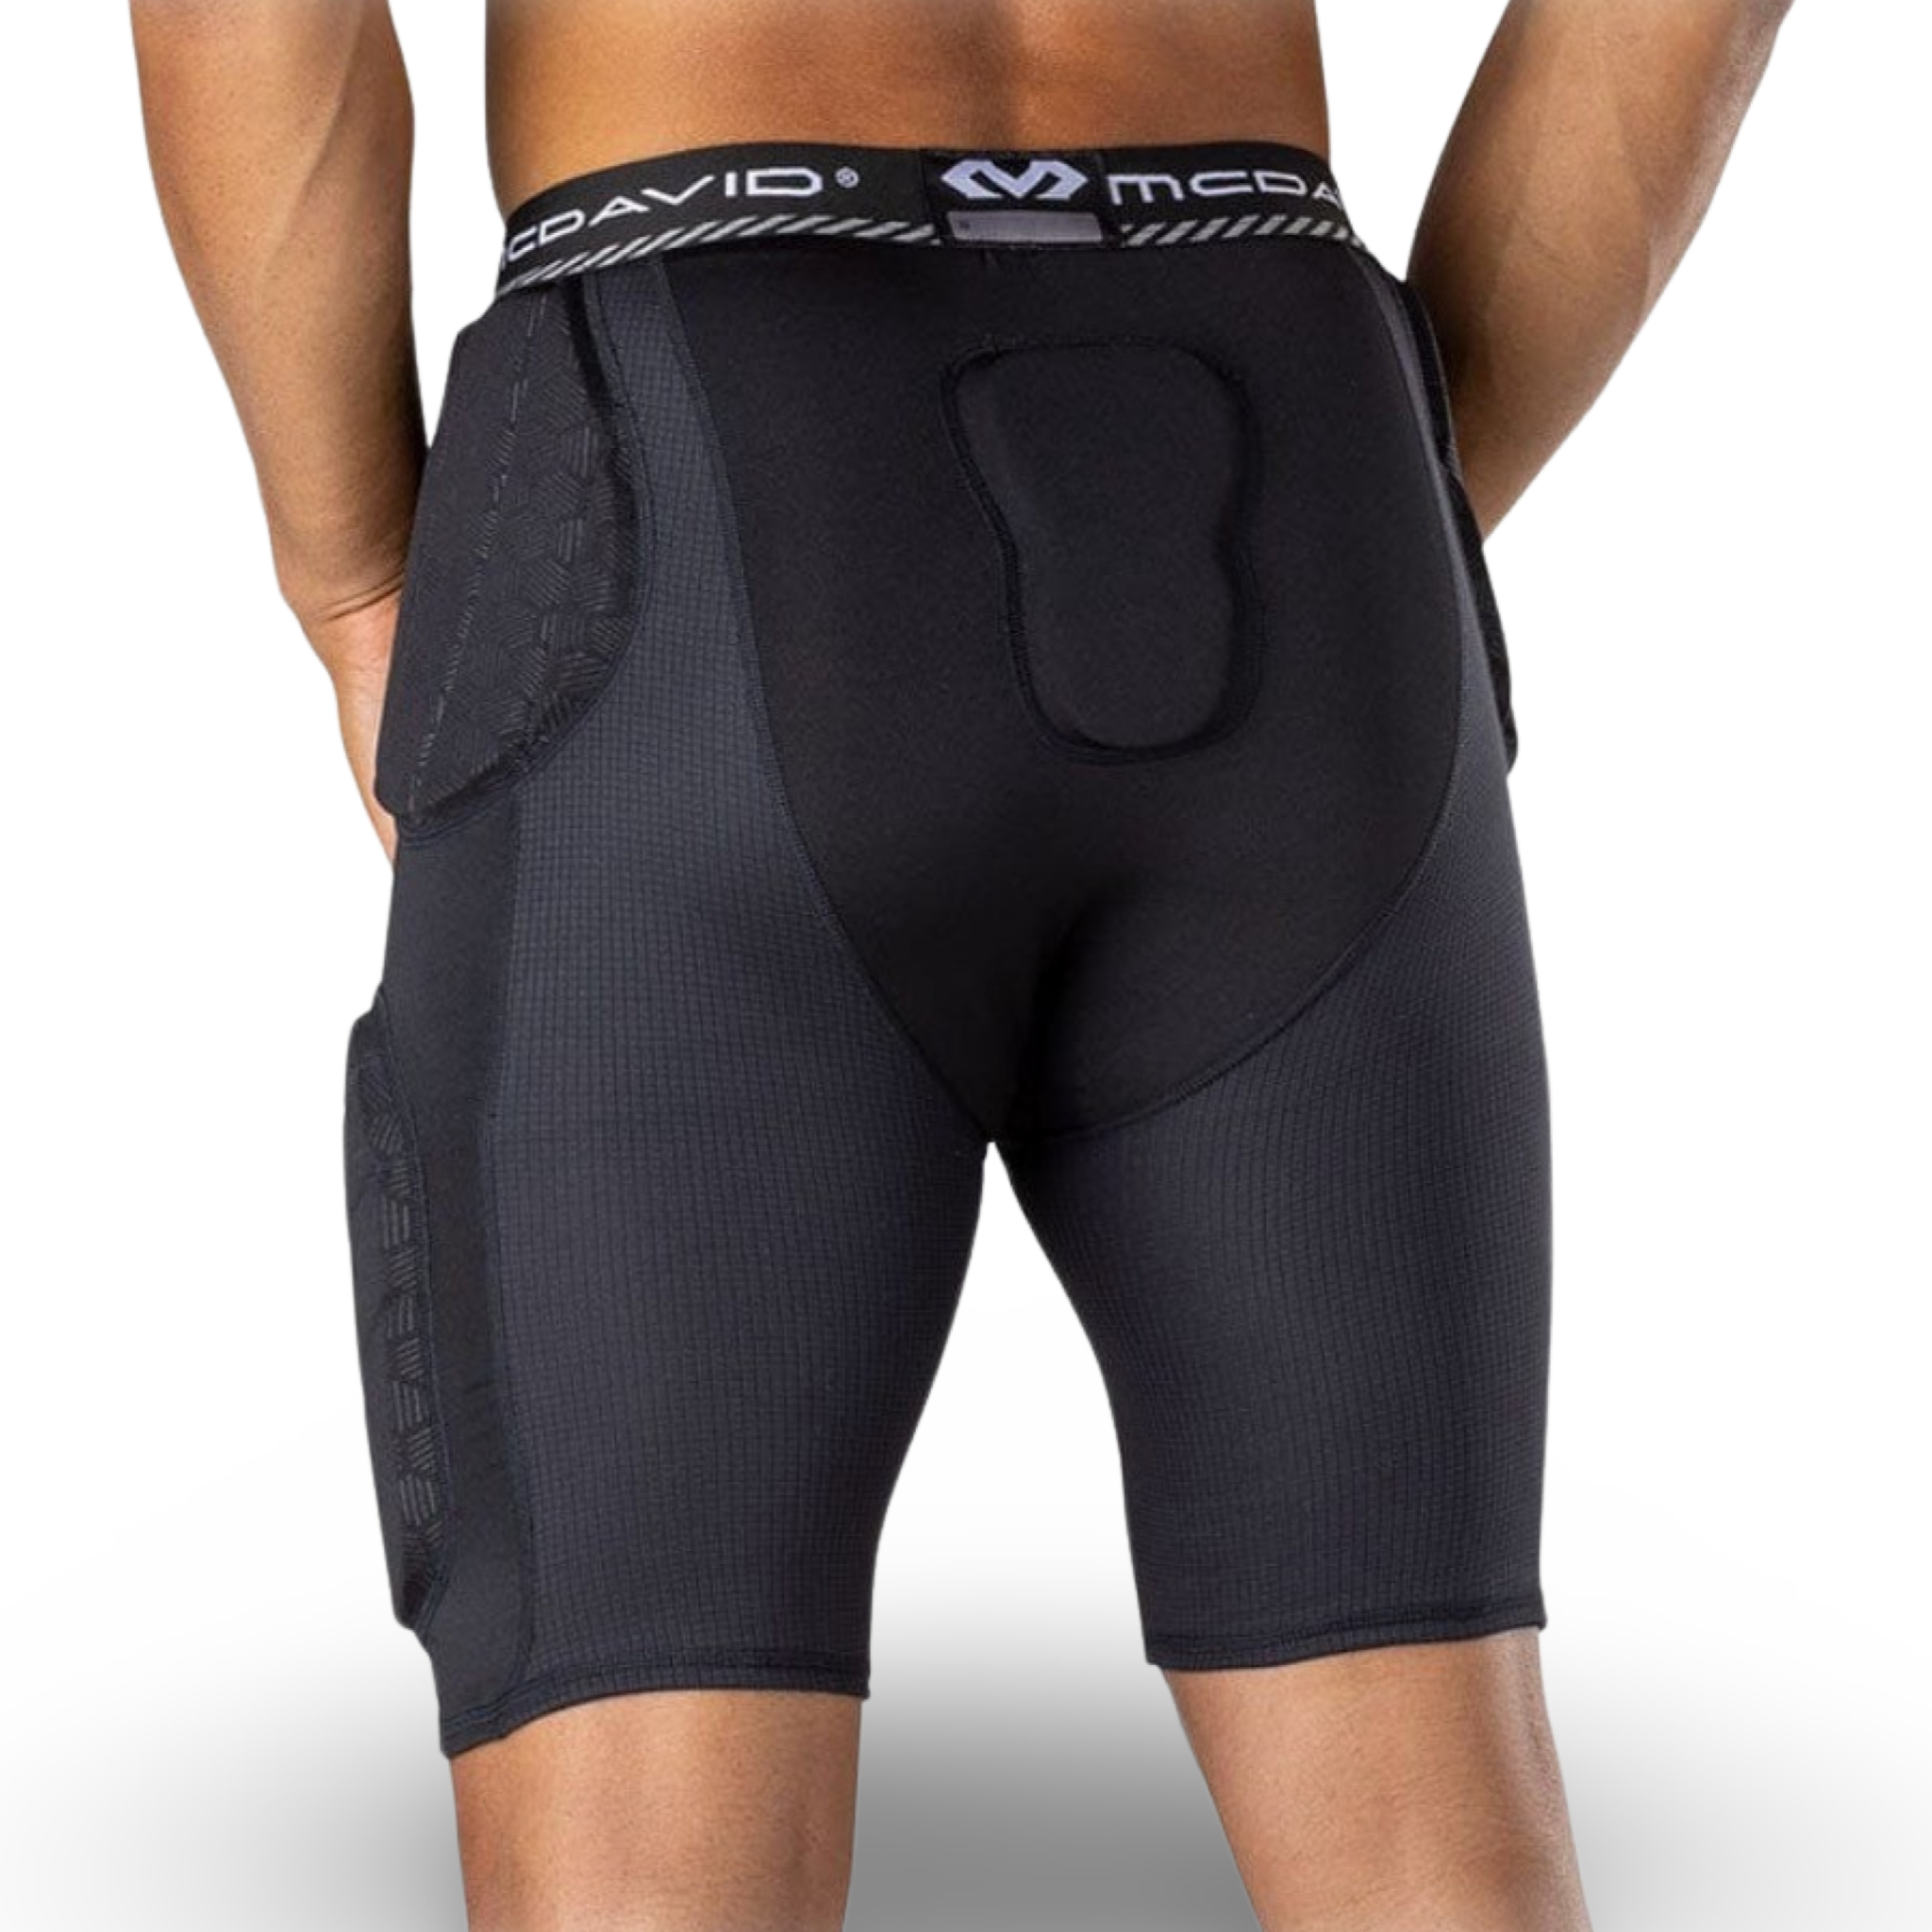 MD Rival™ 5-Pad Football Girdle - Adult